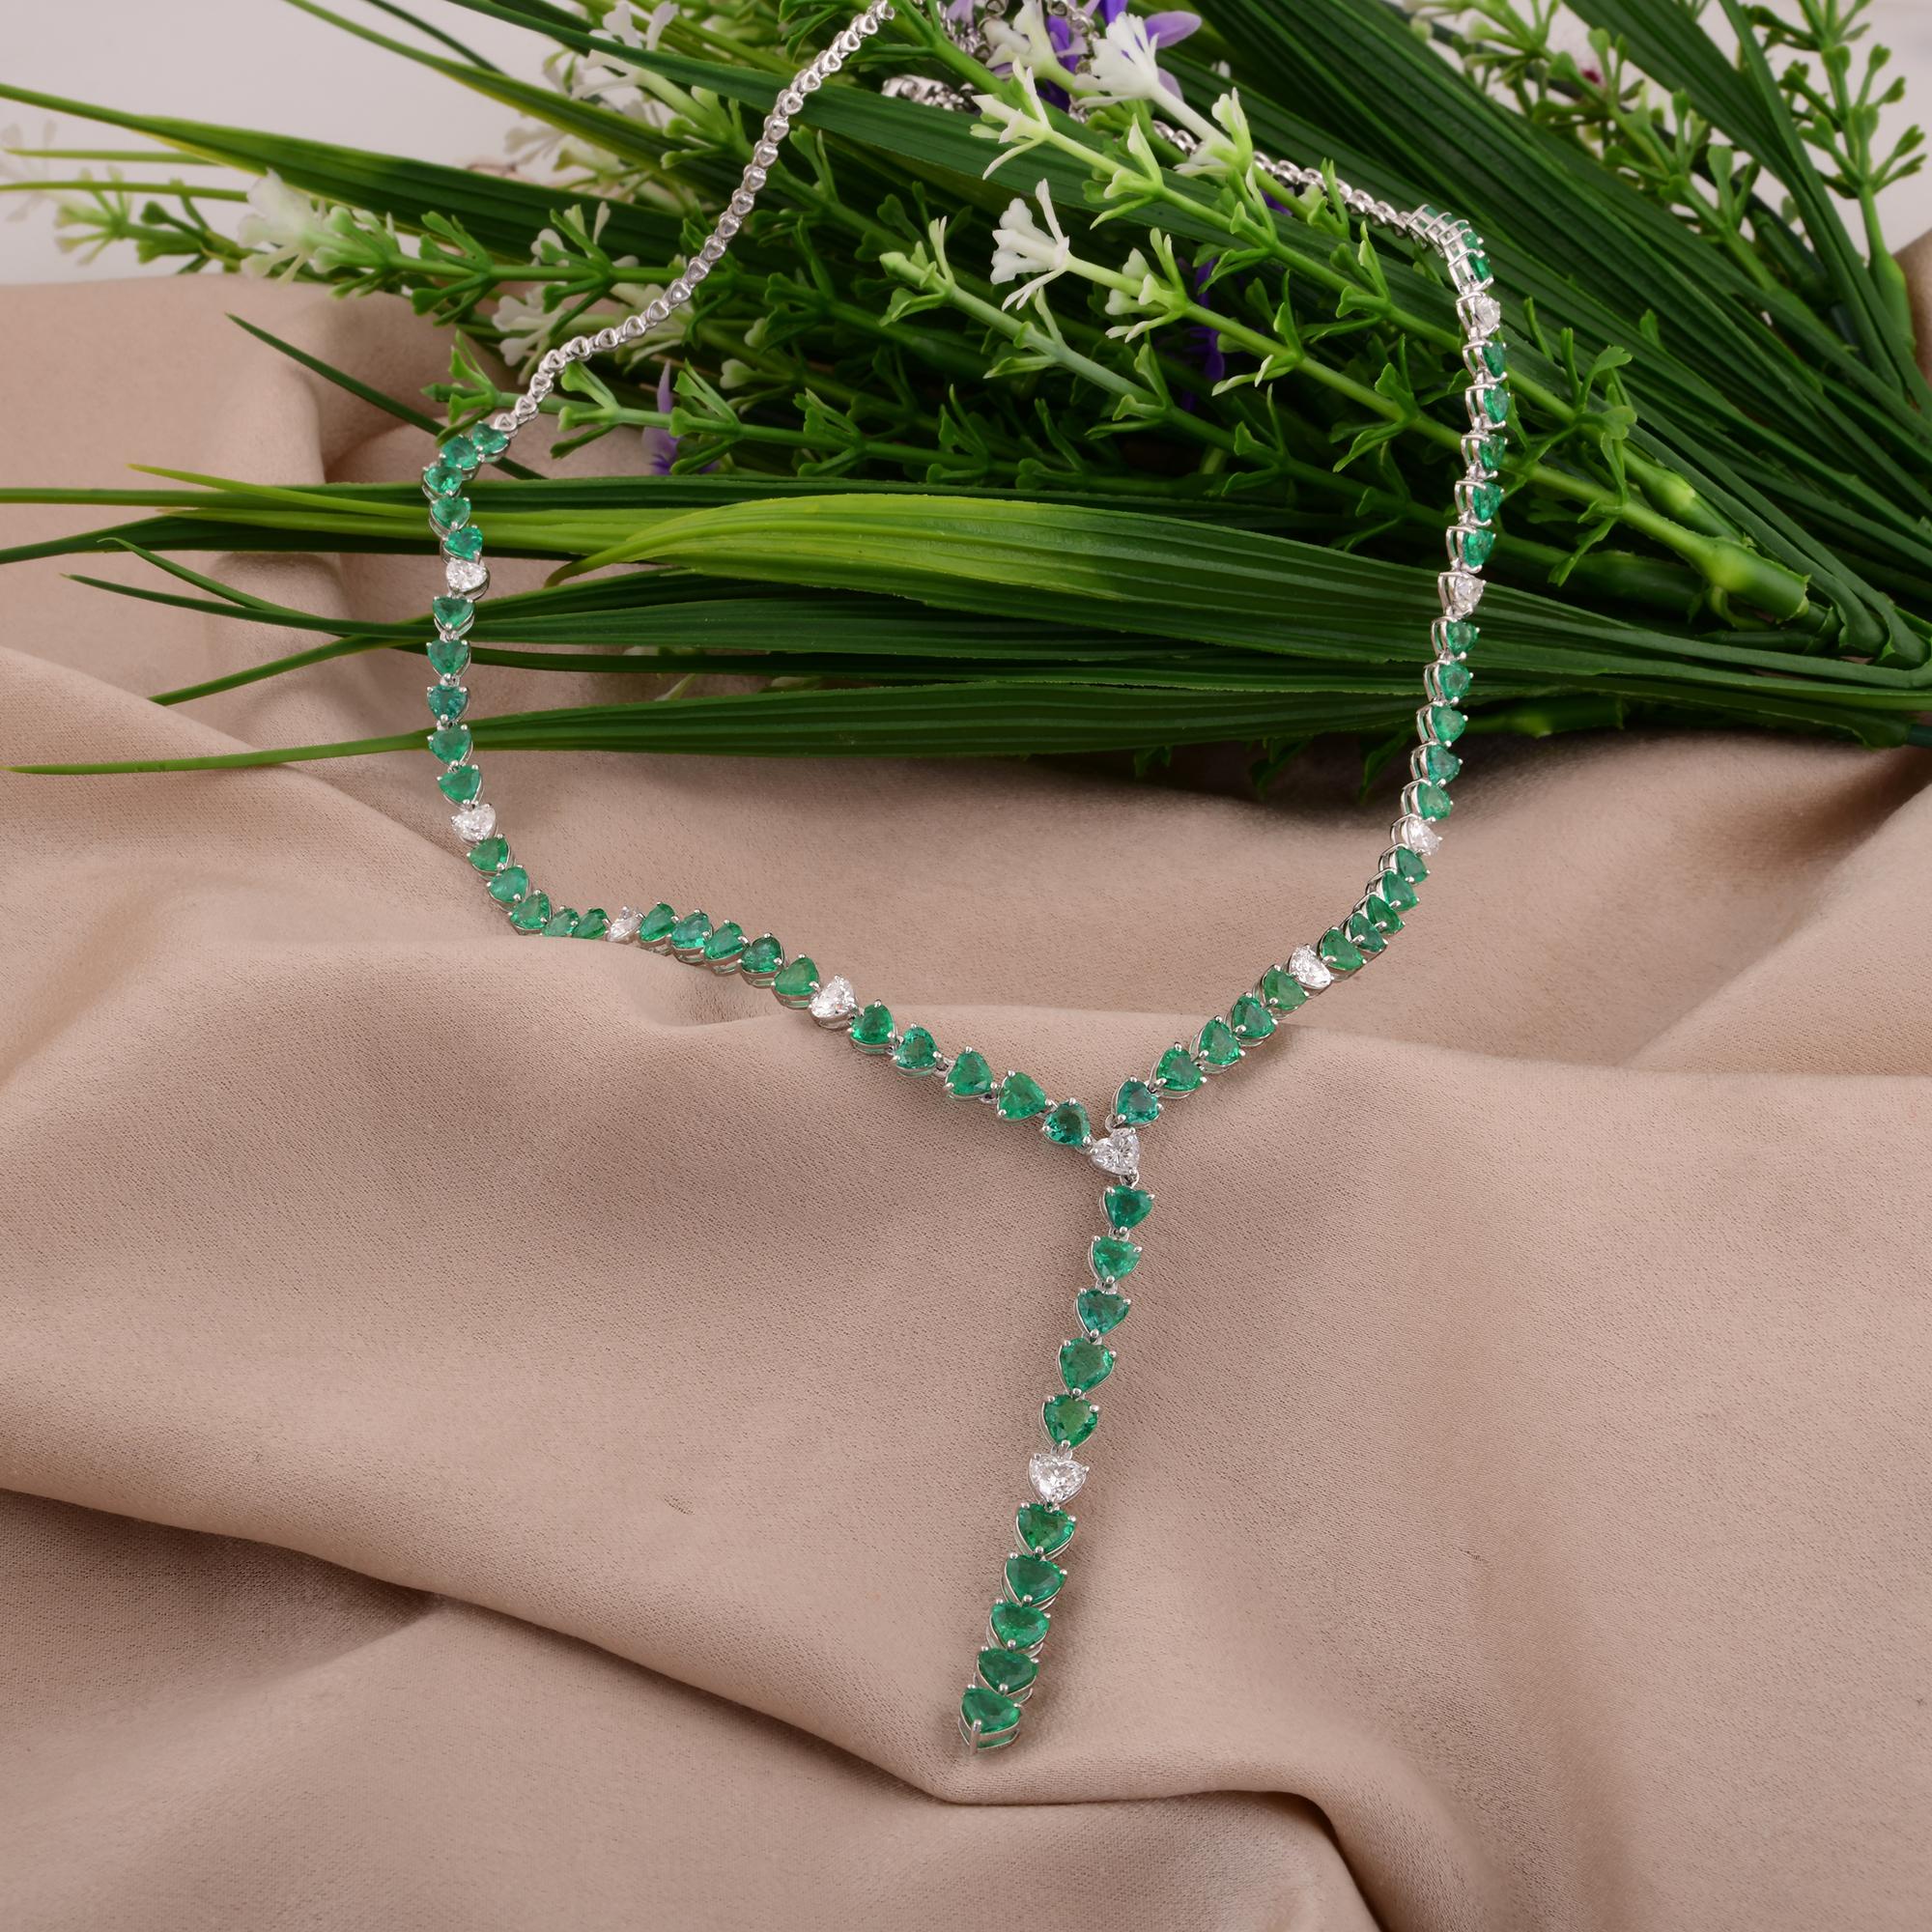 Step into a world of enchantment with this exquisite heart-shaped Zambian emerald and diamond necklace, a masterpiece of fine jewelry meticulously crafted in 18 karat white gold. At its center lies a captivating heart-shaped Zambian emerald,